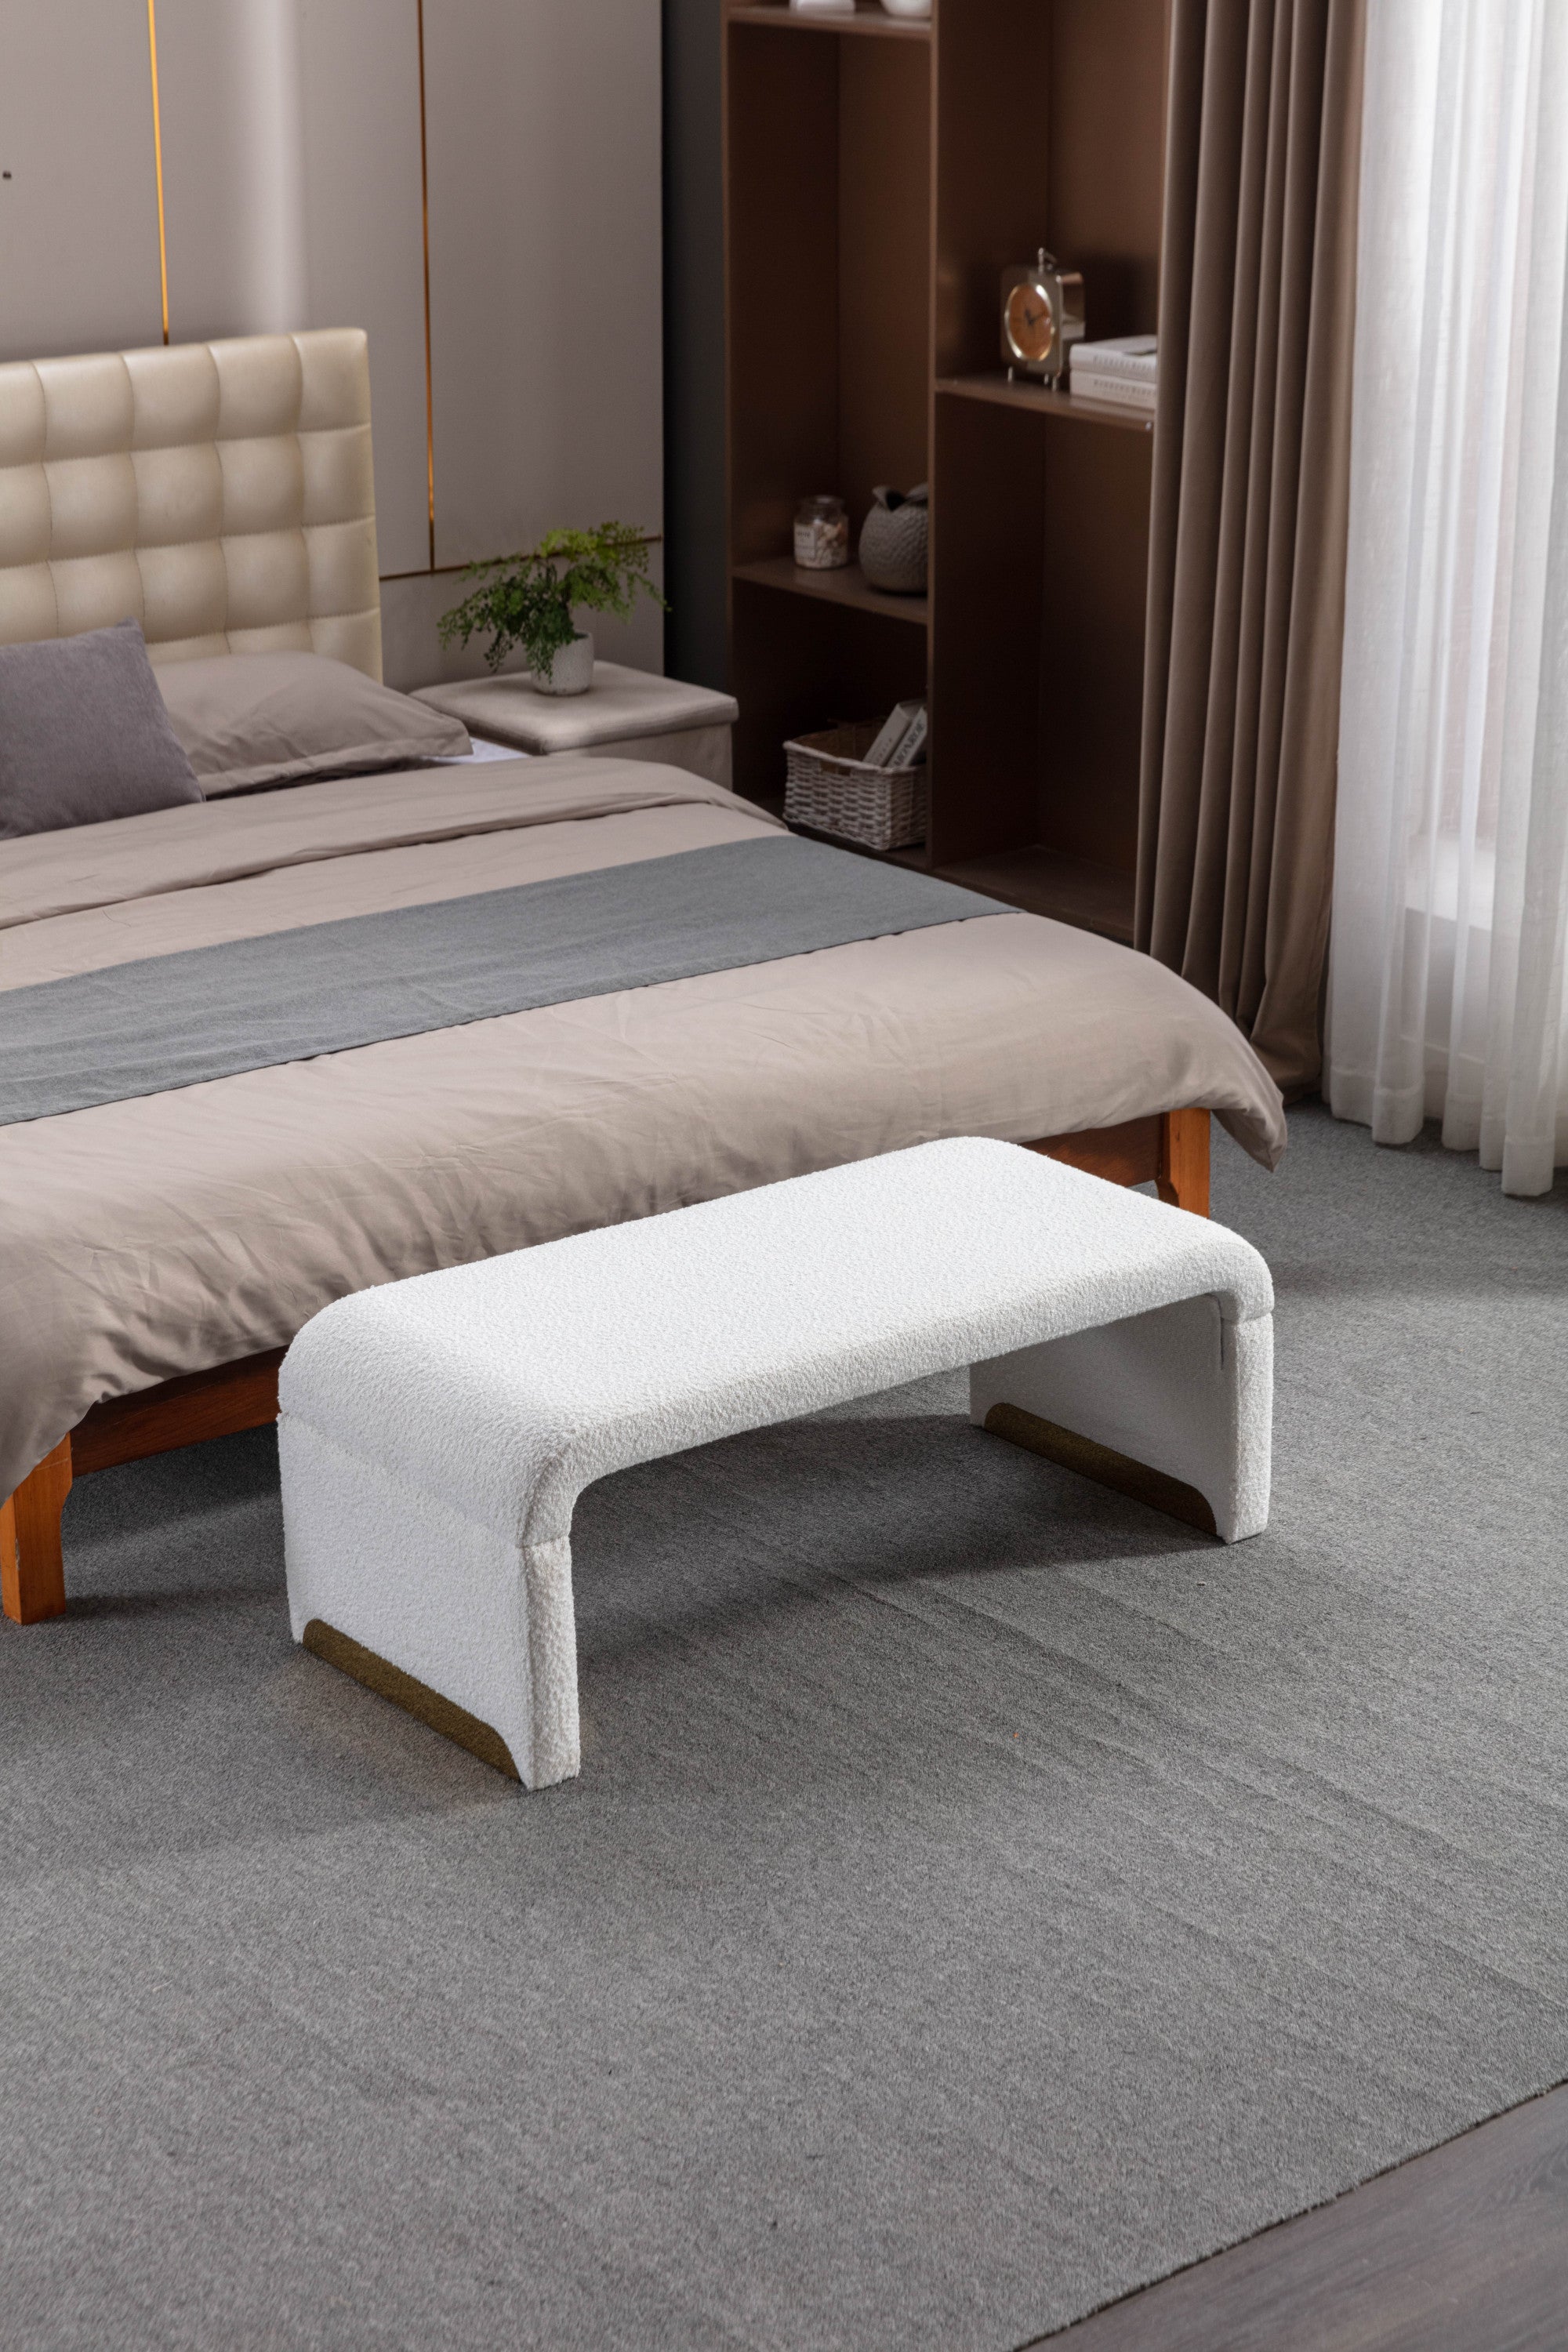 Footstool Bedroom Bench With Gold Metal Legs - Ivory White